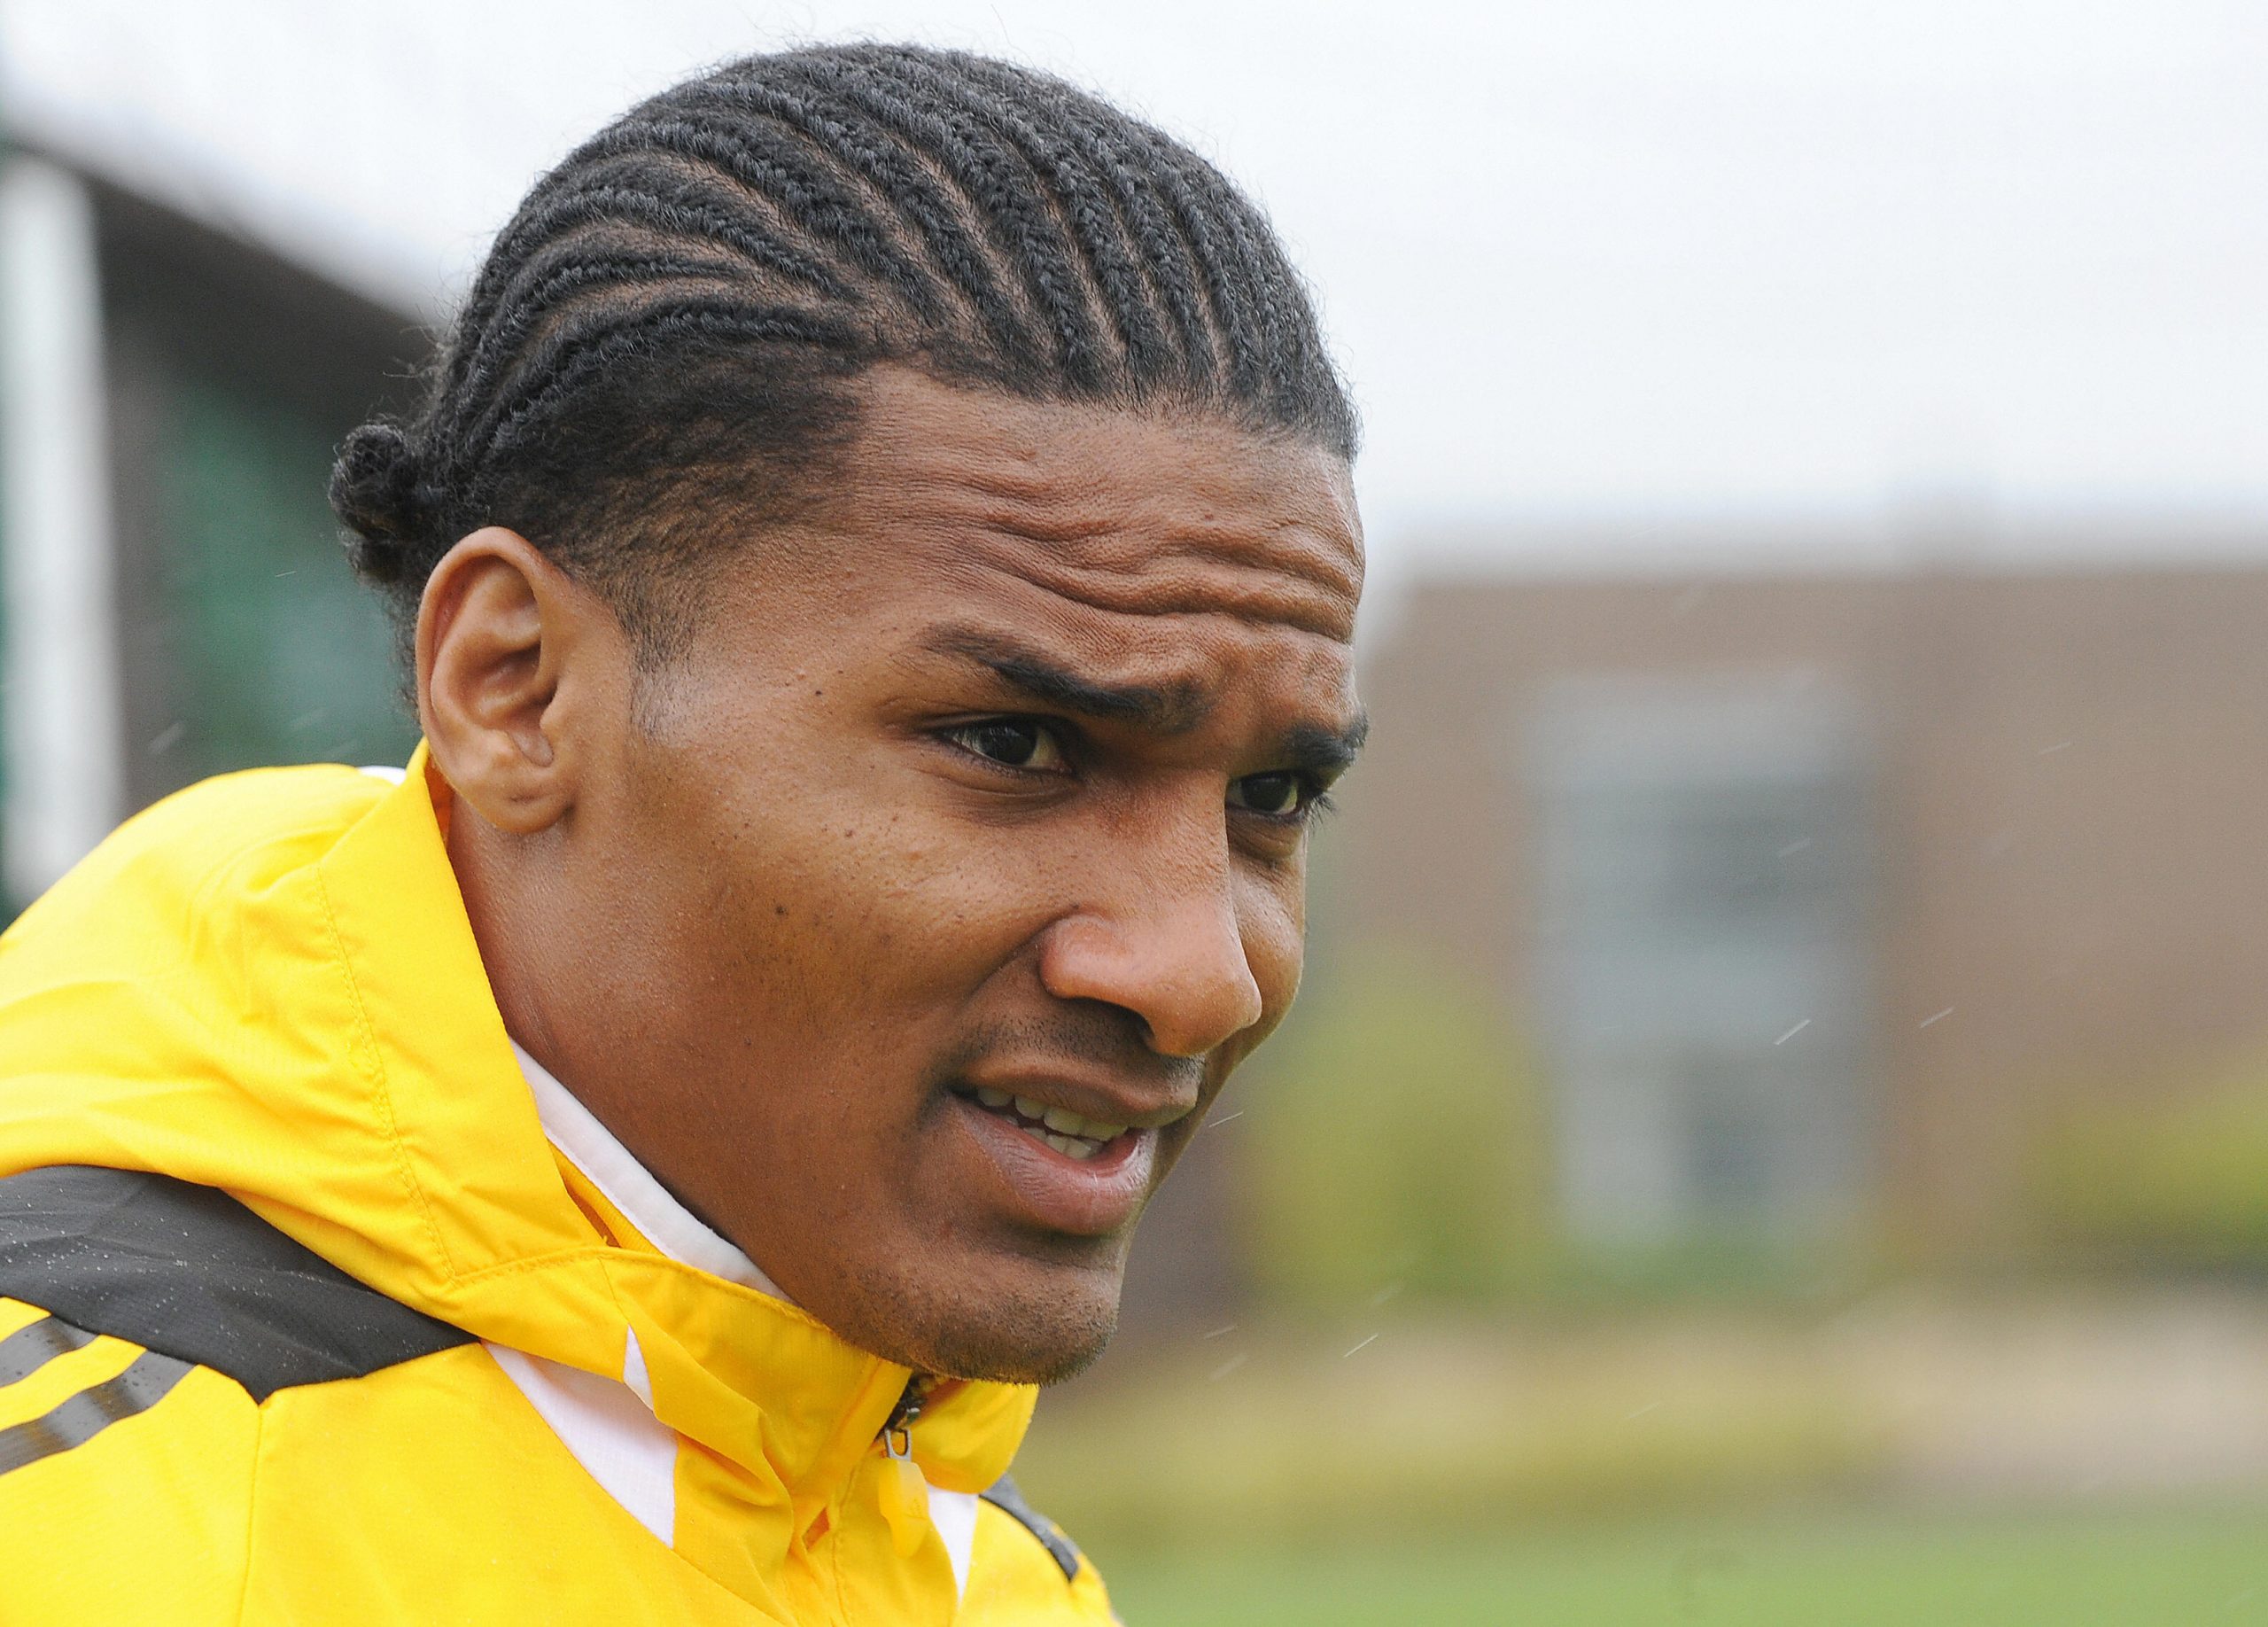 Florent Malouda arrives for a training session for Chelsea in April 2008.